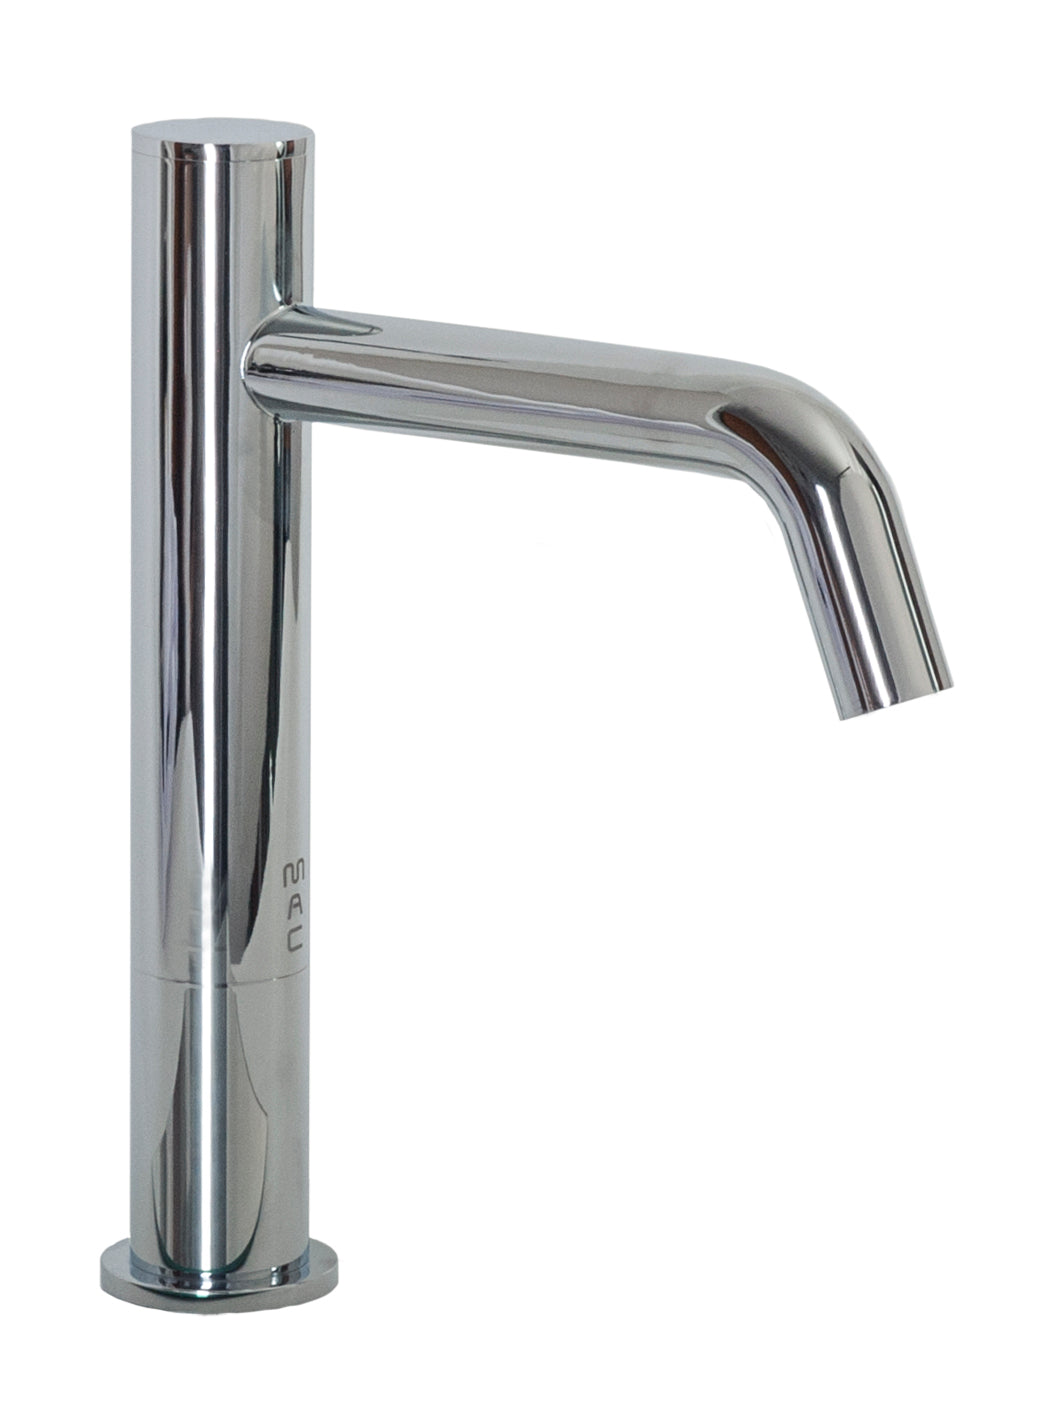 FA-3283 Automatic Faucet with 8” Spout Reach and 3” Riser